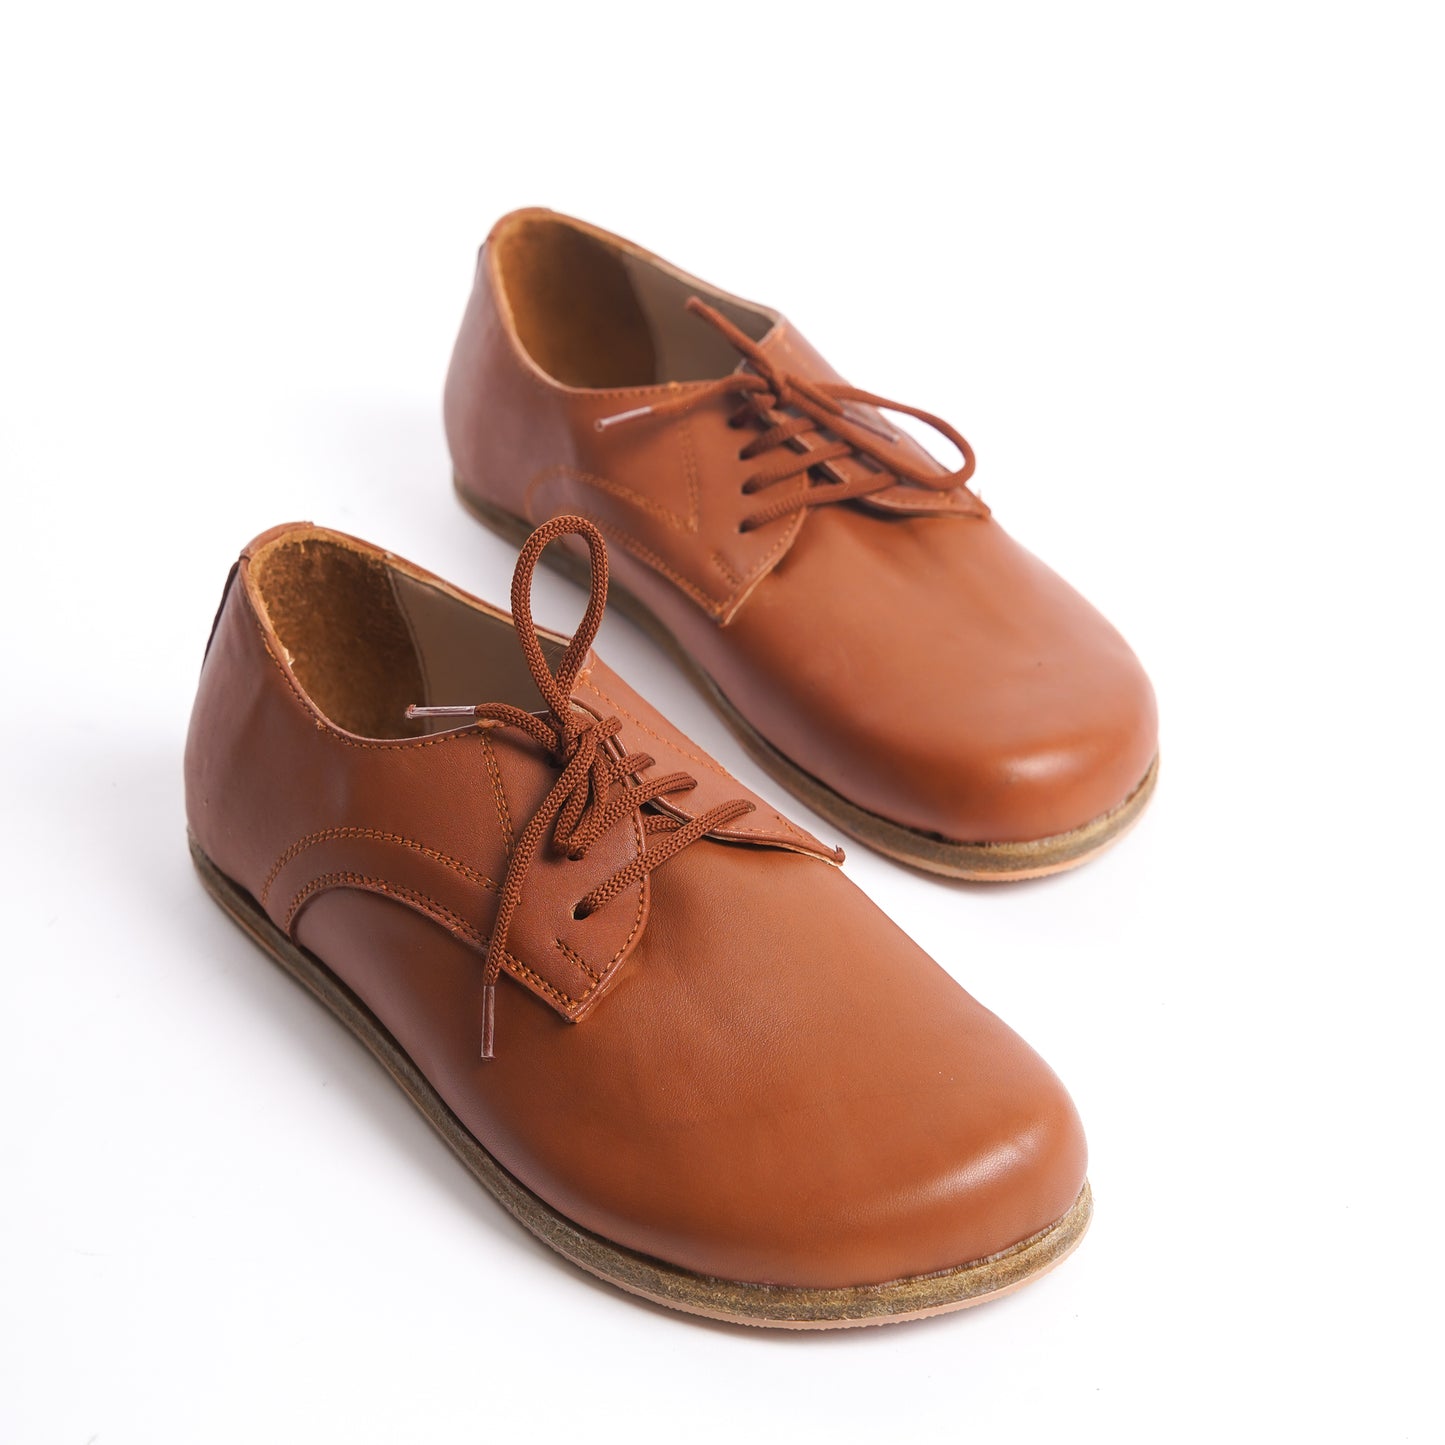 Locris Leather Barefoot Women Oxfords - Tan Brown